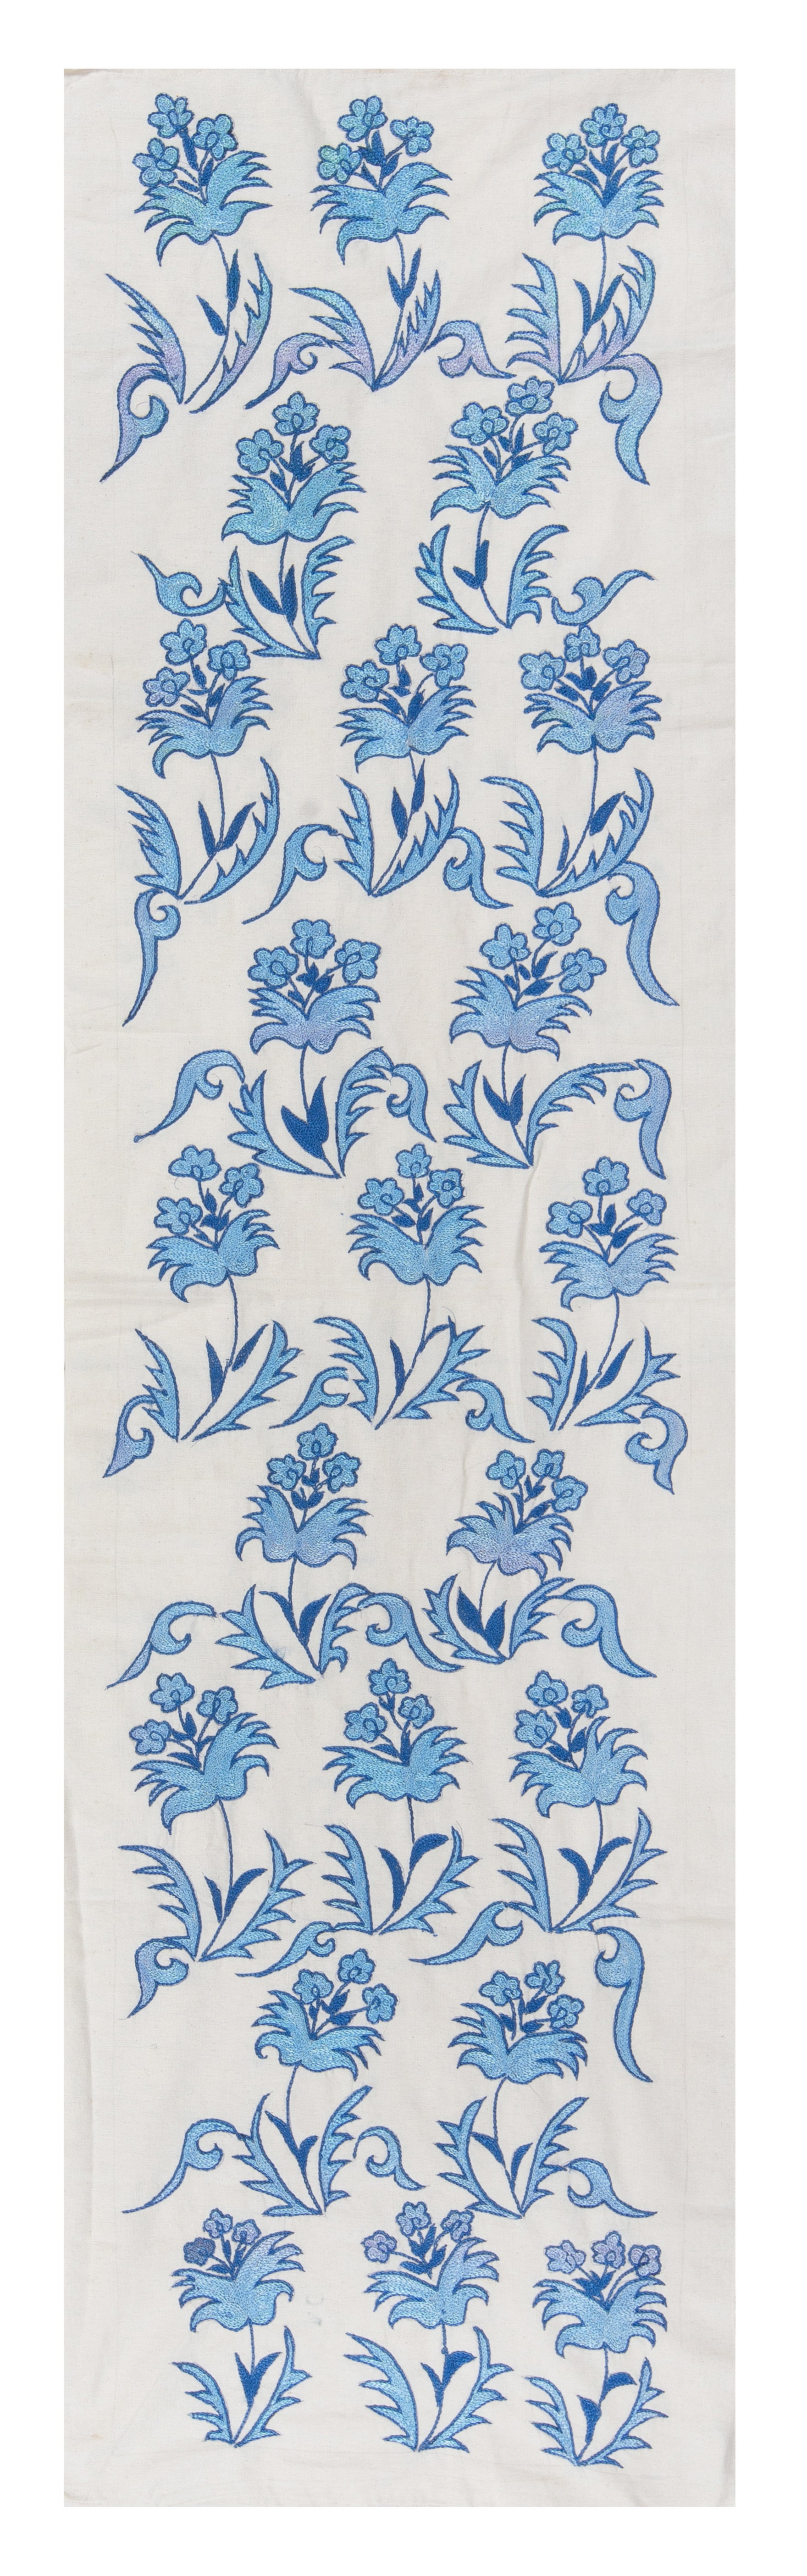 1.7x6.3 Ft Floral Suzani Table Runner, Embroidered Wall Hanging, Blue Tapestry For Sale